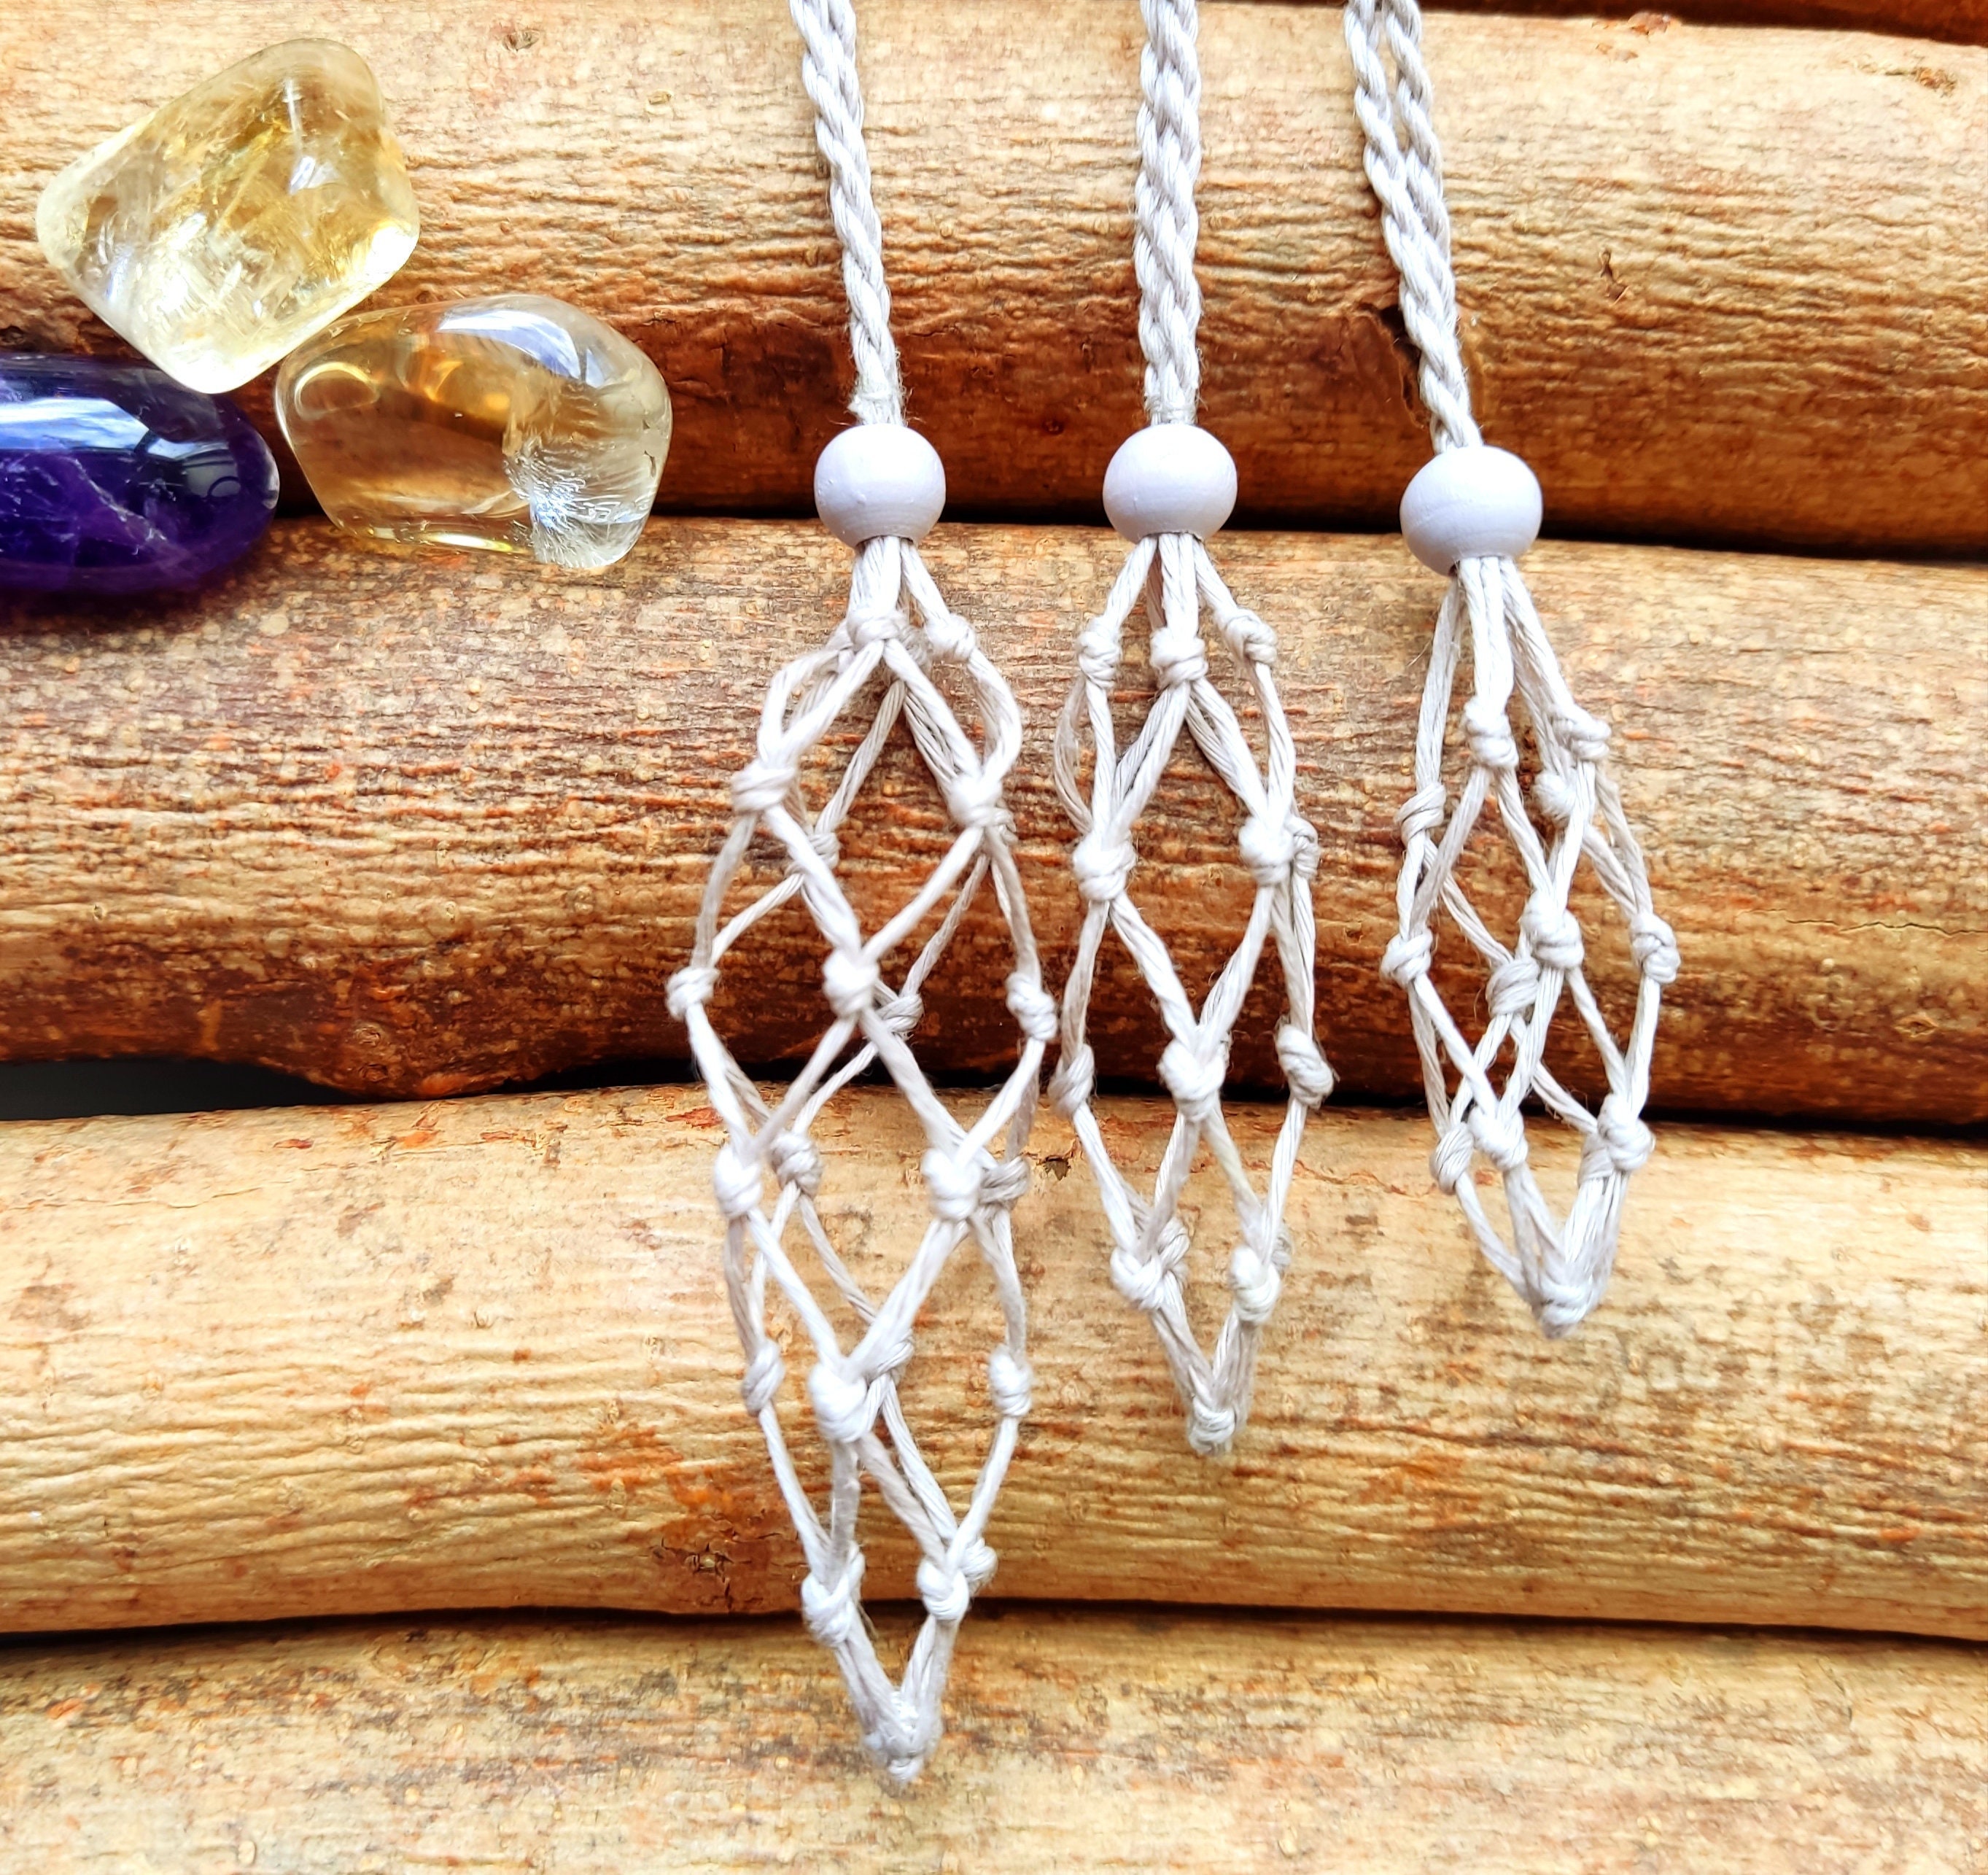 Crystal Holder Necklace - Macrame Necklace, Interchangeable, Woven